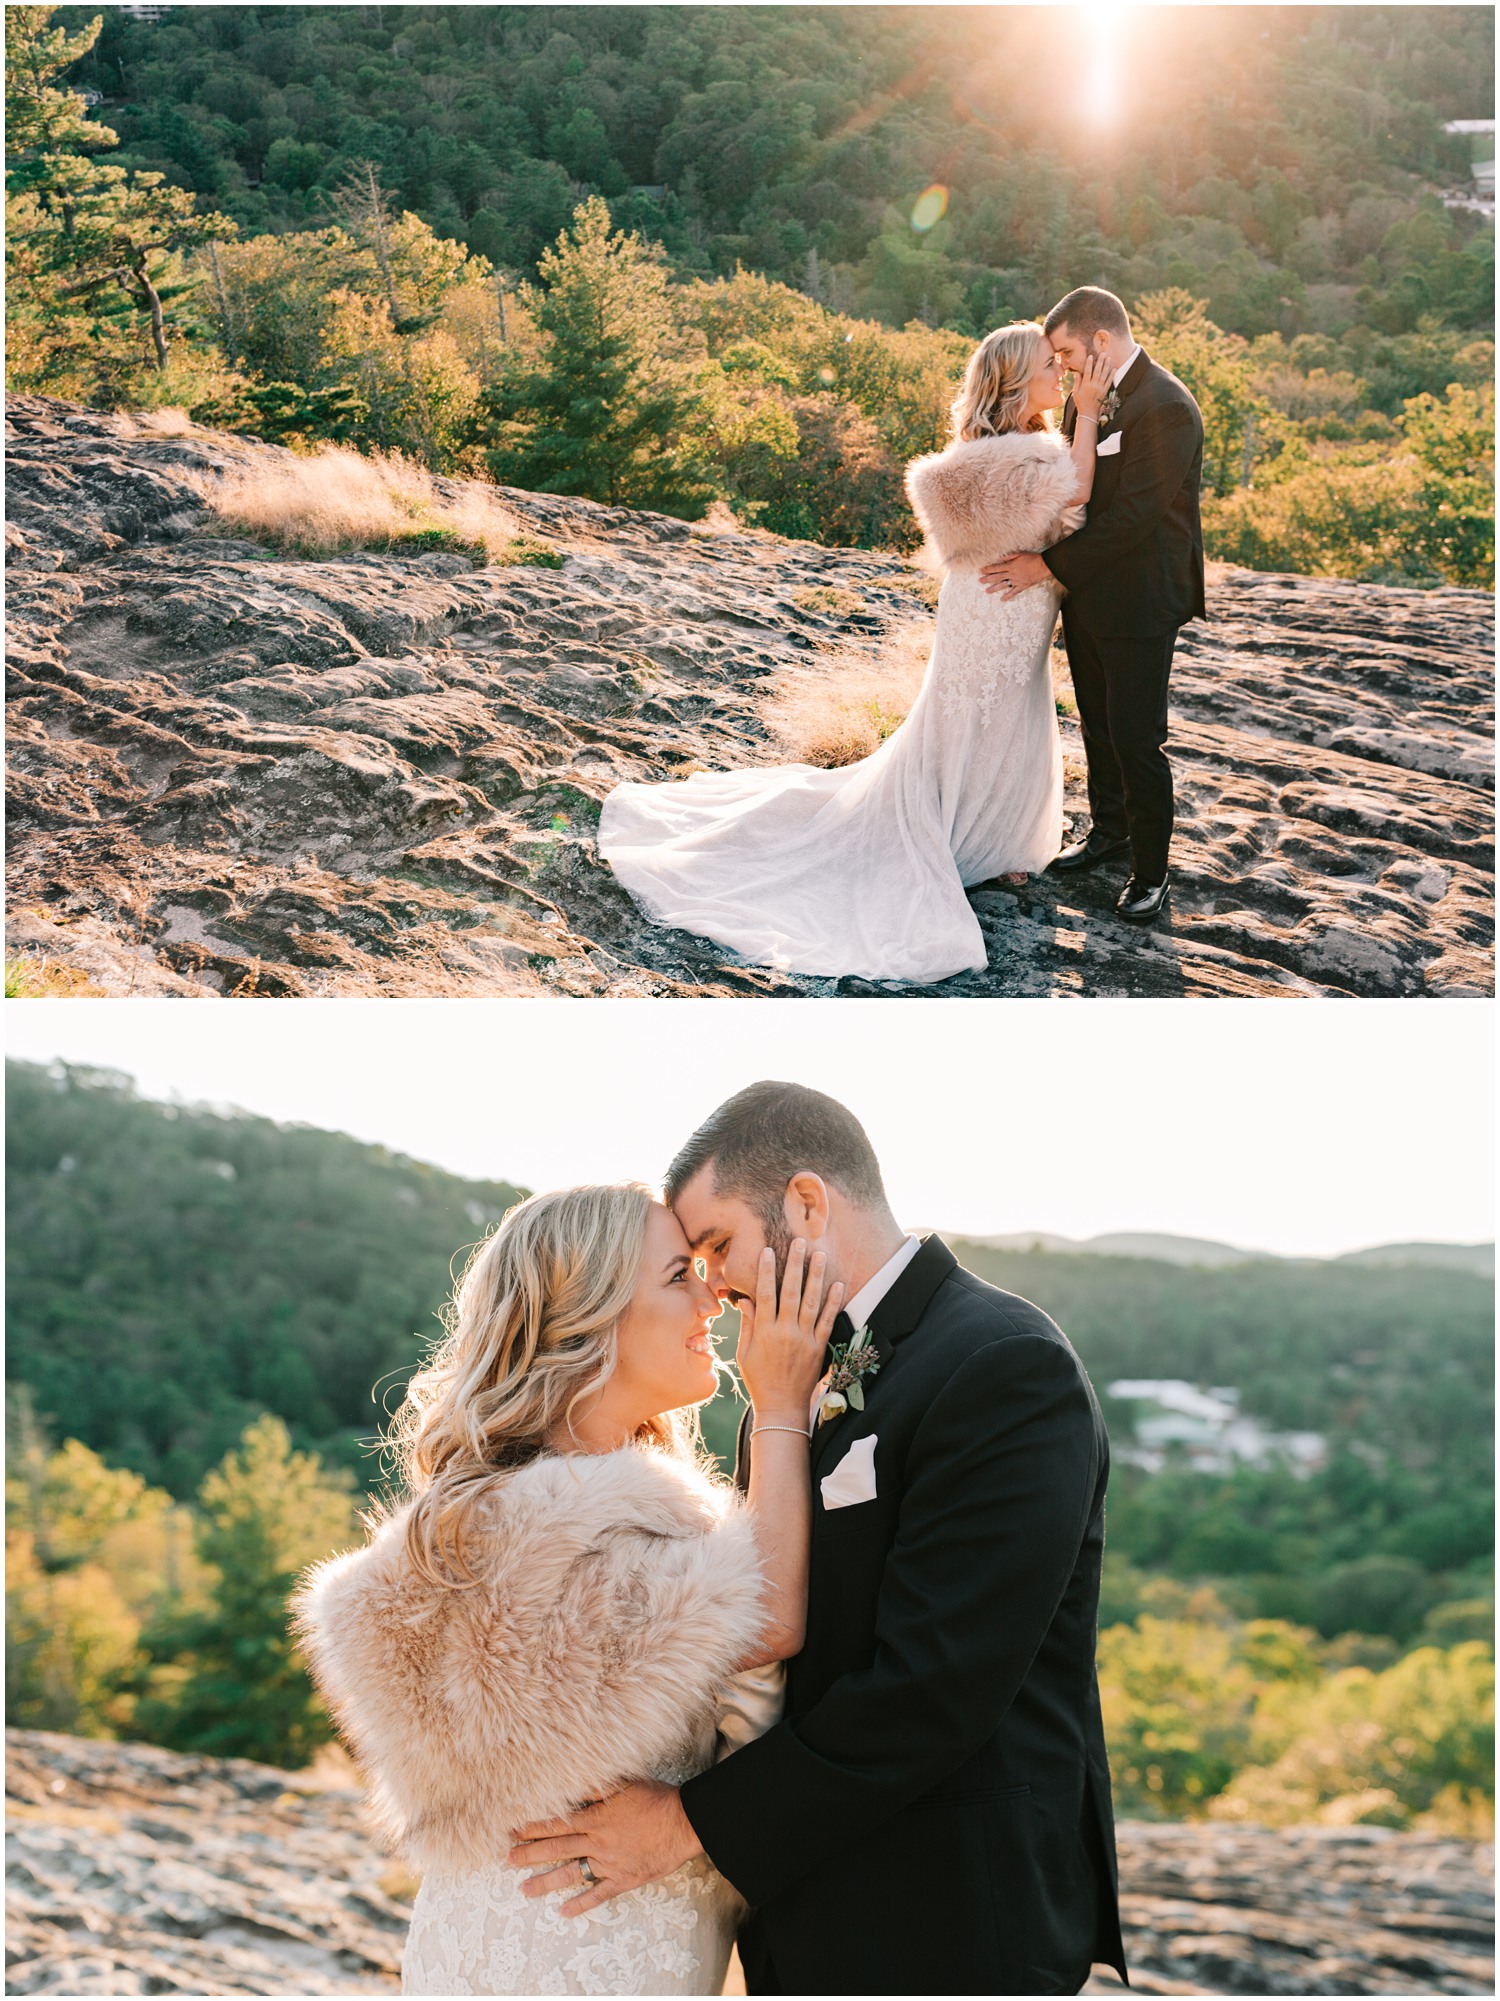 hilltop wedding portraits of bride with fur wrap and groom in tux